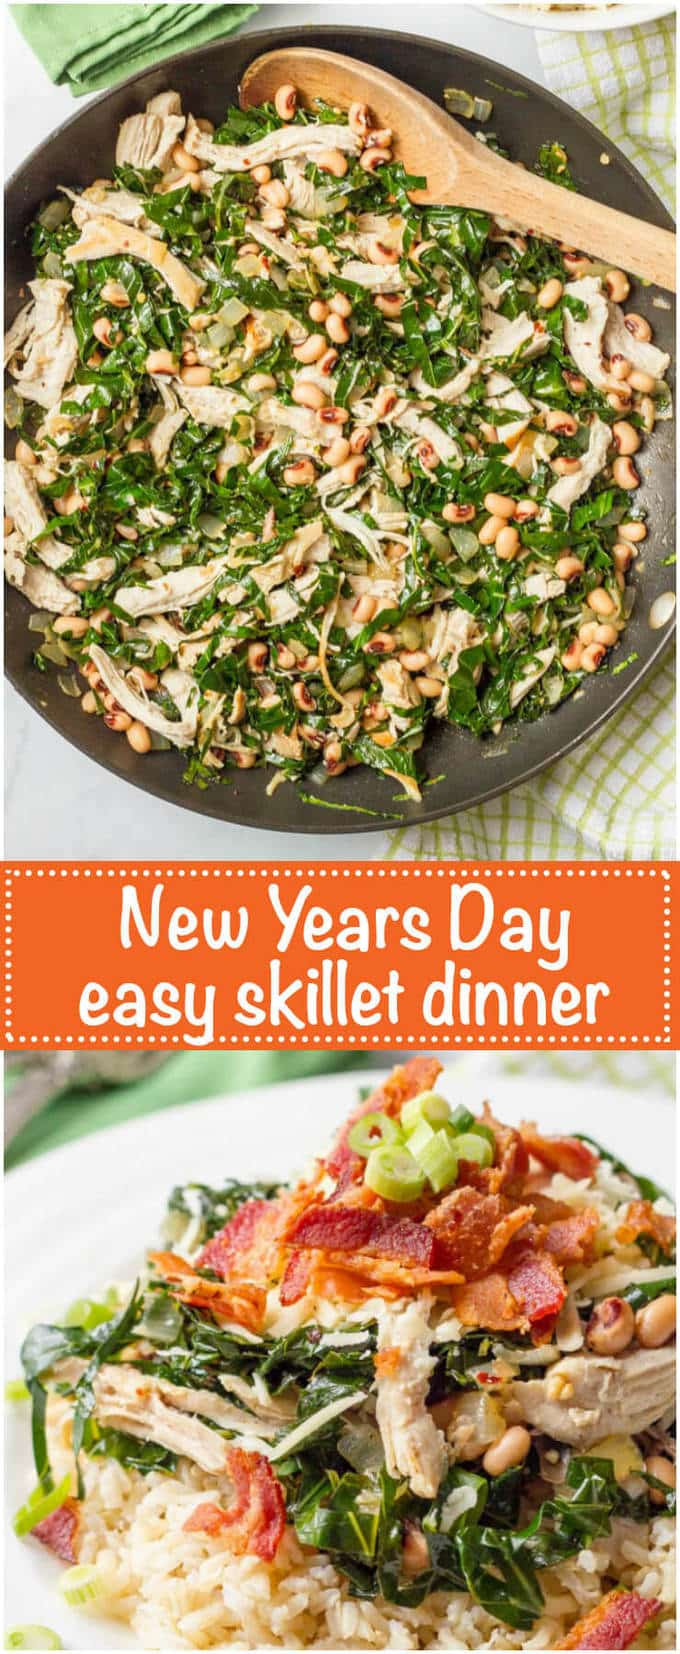 Traditional New Year'S Day Desserts
 Southern New Year s Day dinner skillet Family Food on